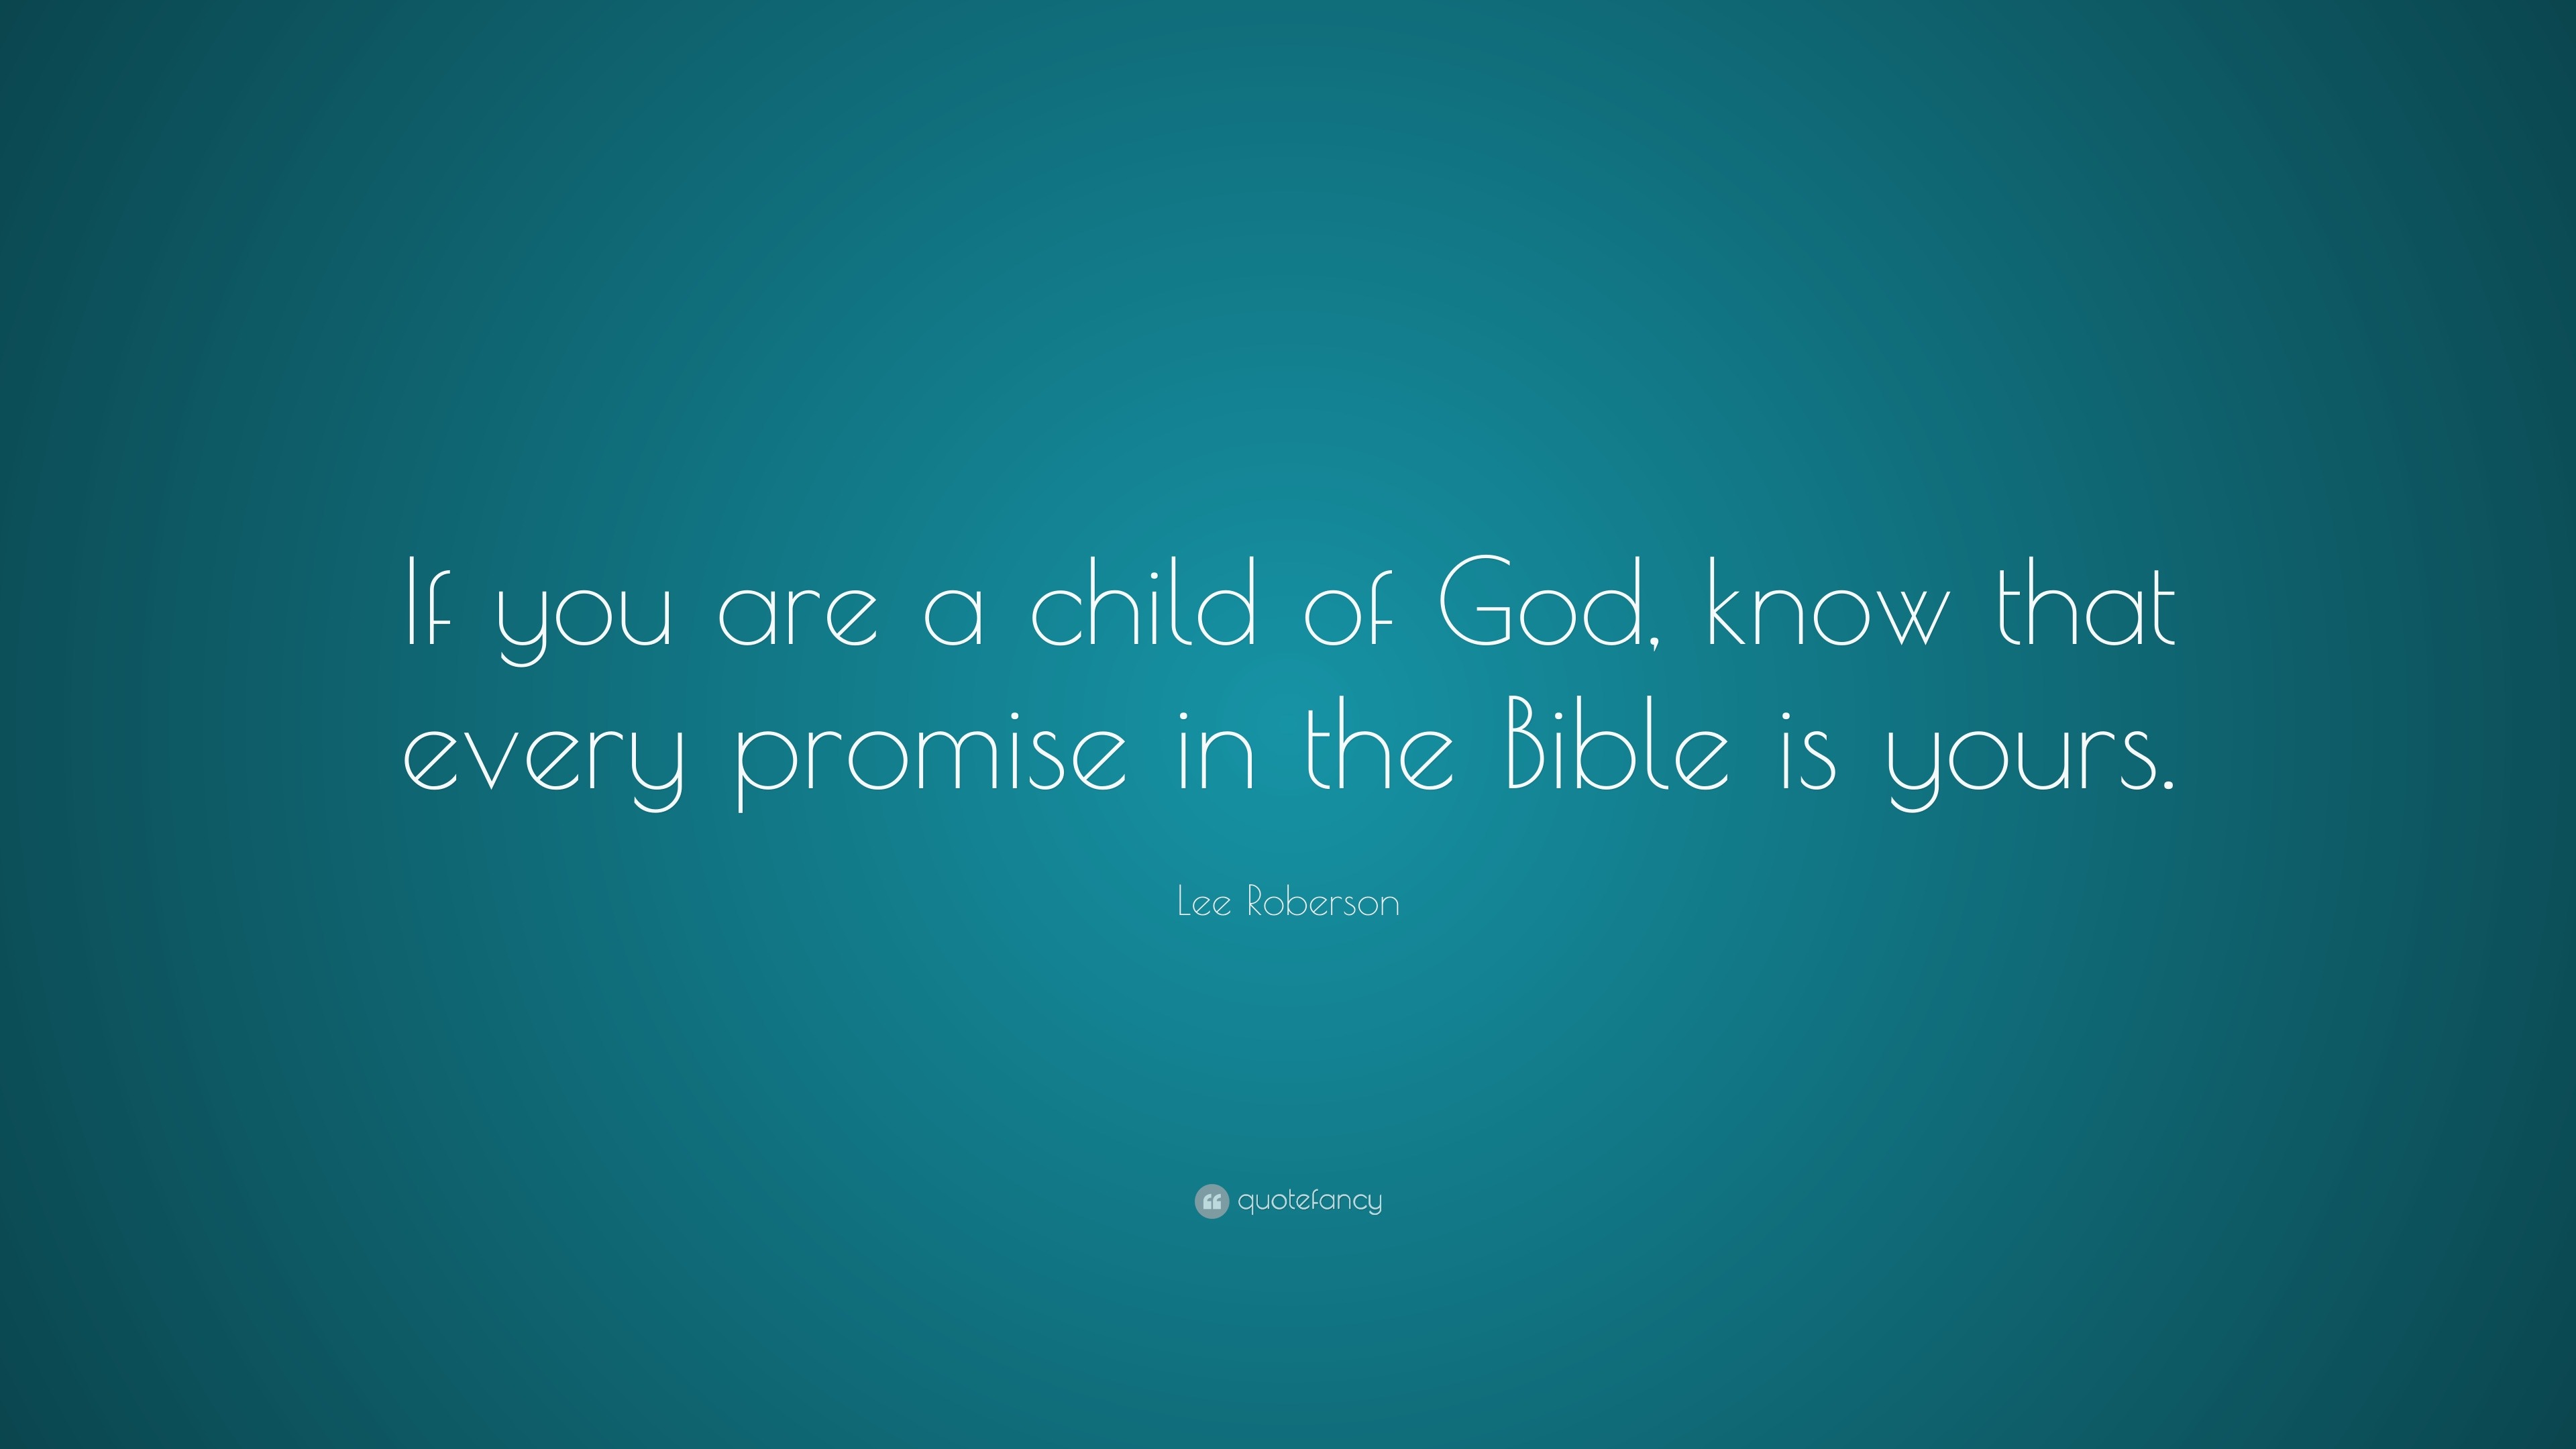 Lee Roberson Quote: "If you are a child of God, know that every promise in the Bible is yours."